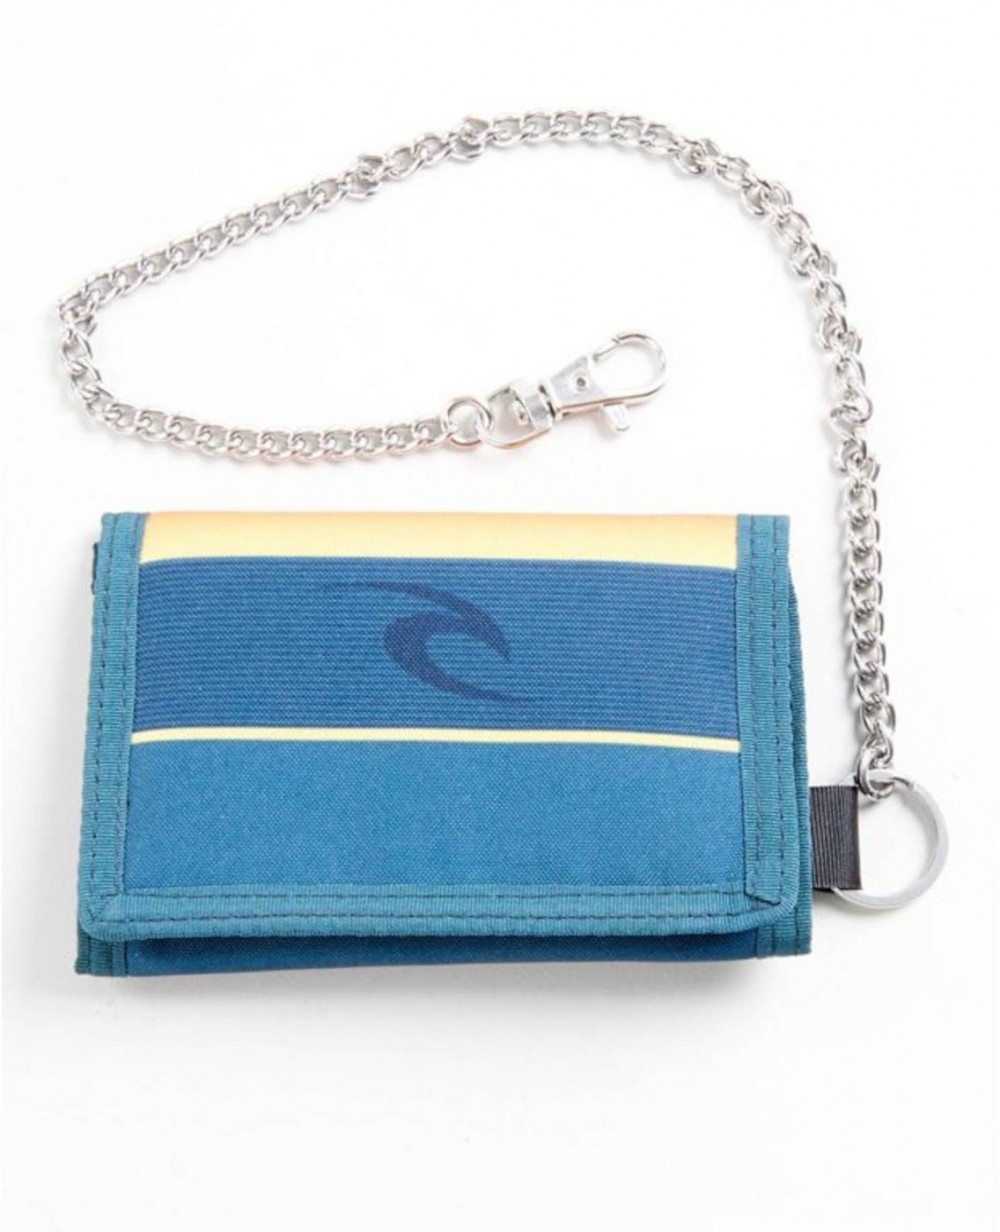 Rip Curl SURF CHAIN WALLET Navy Wallet